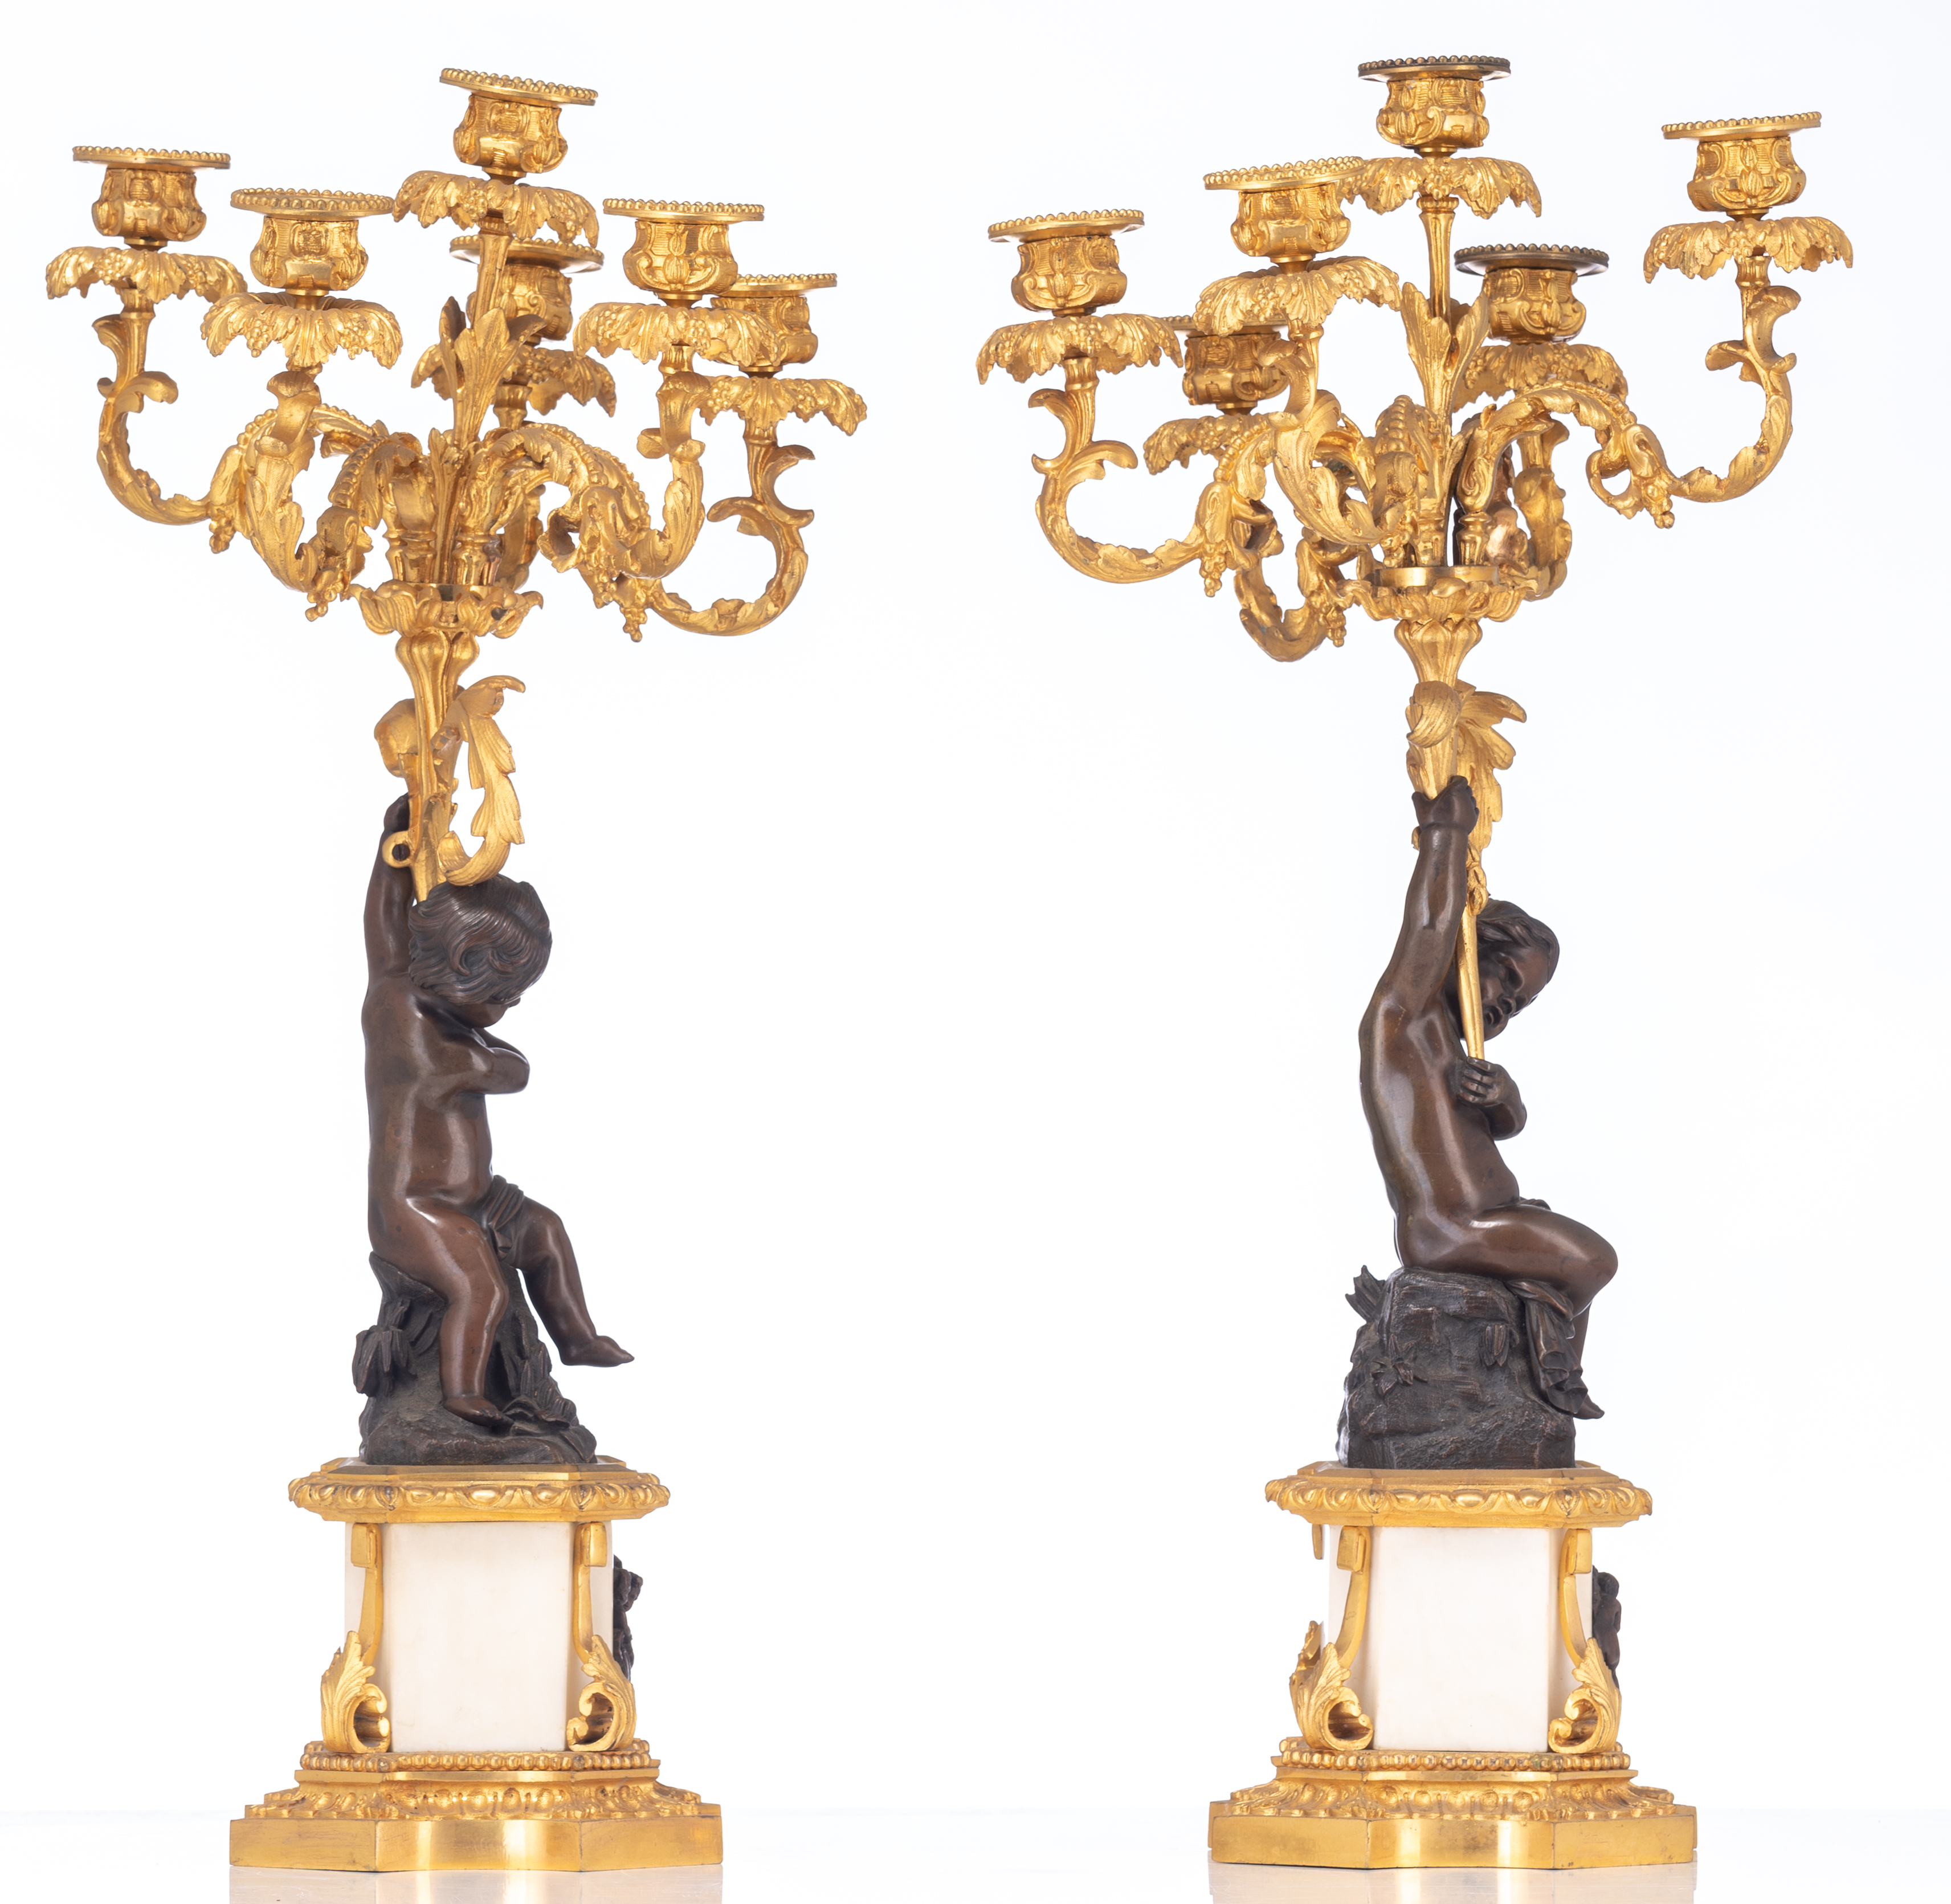 A fine pair of Neoclassical candelabras, decorated with putti, H 63,5 - Image 4 of 5